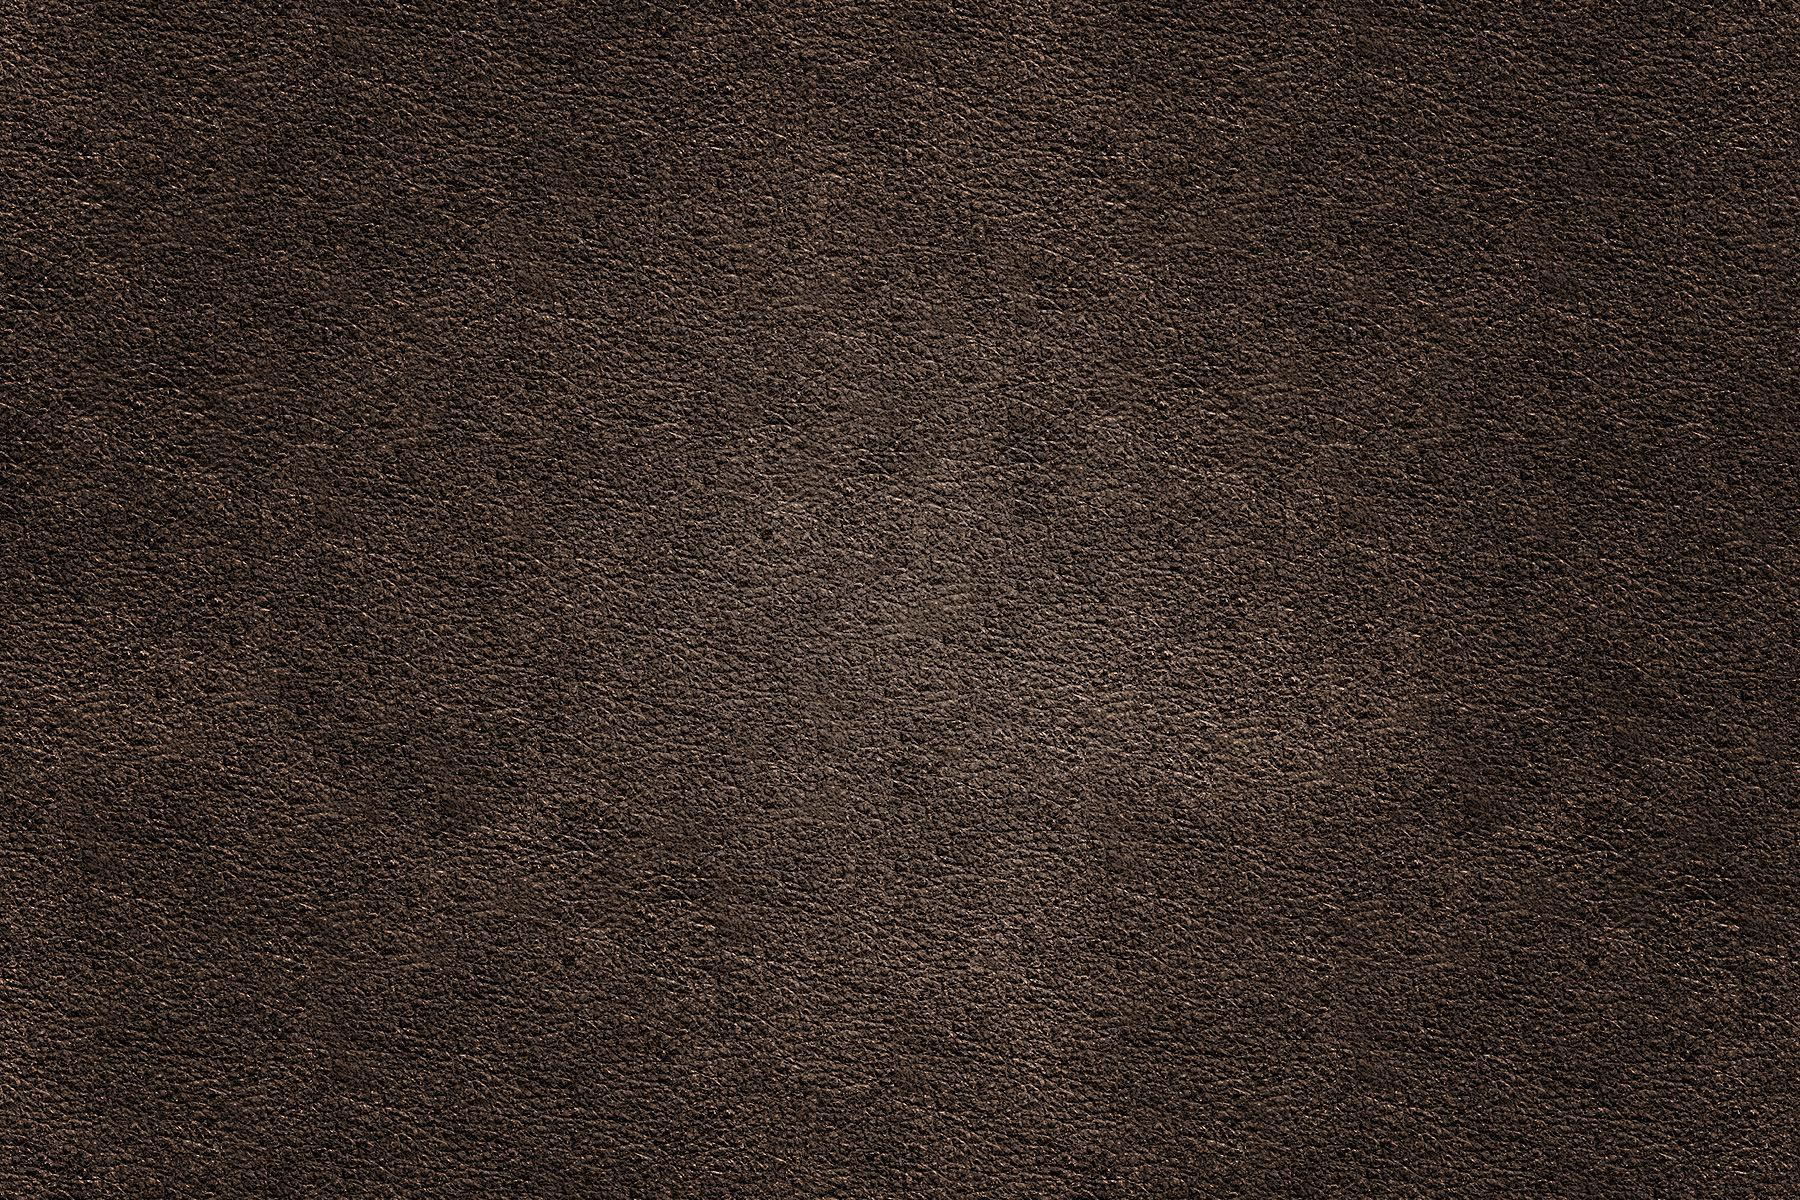 Leather Background Wallpaper HD 16368